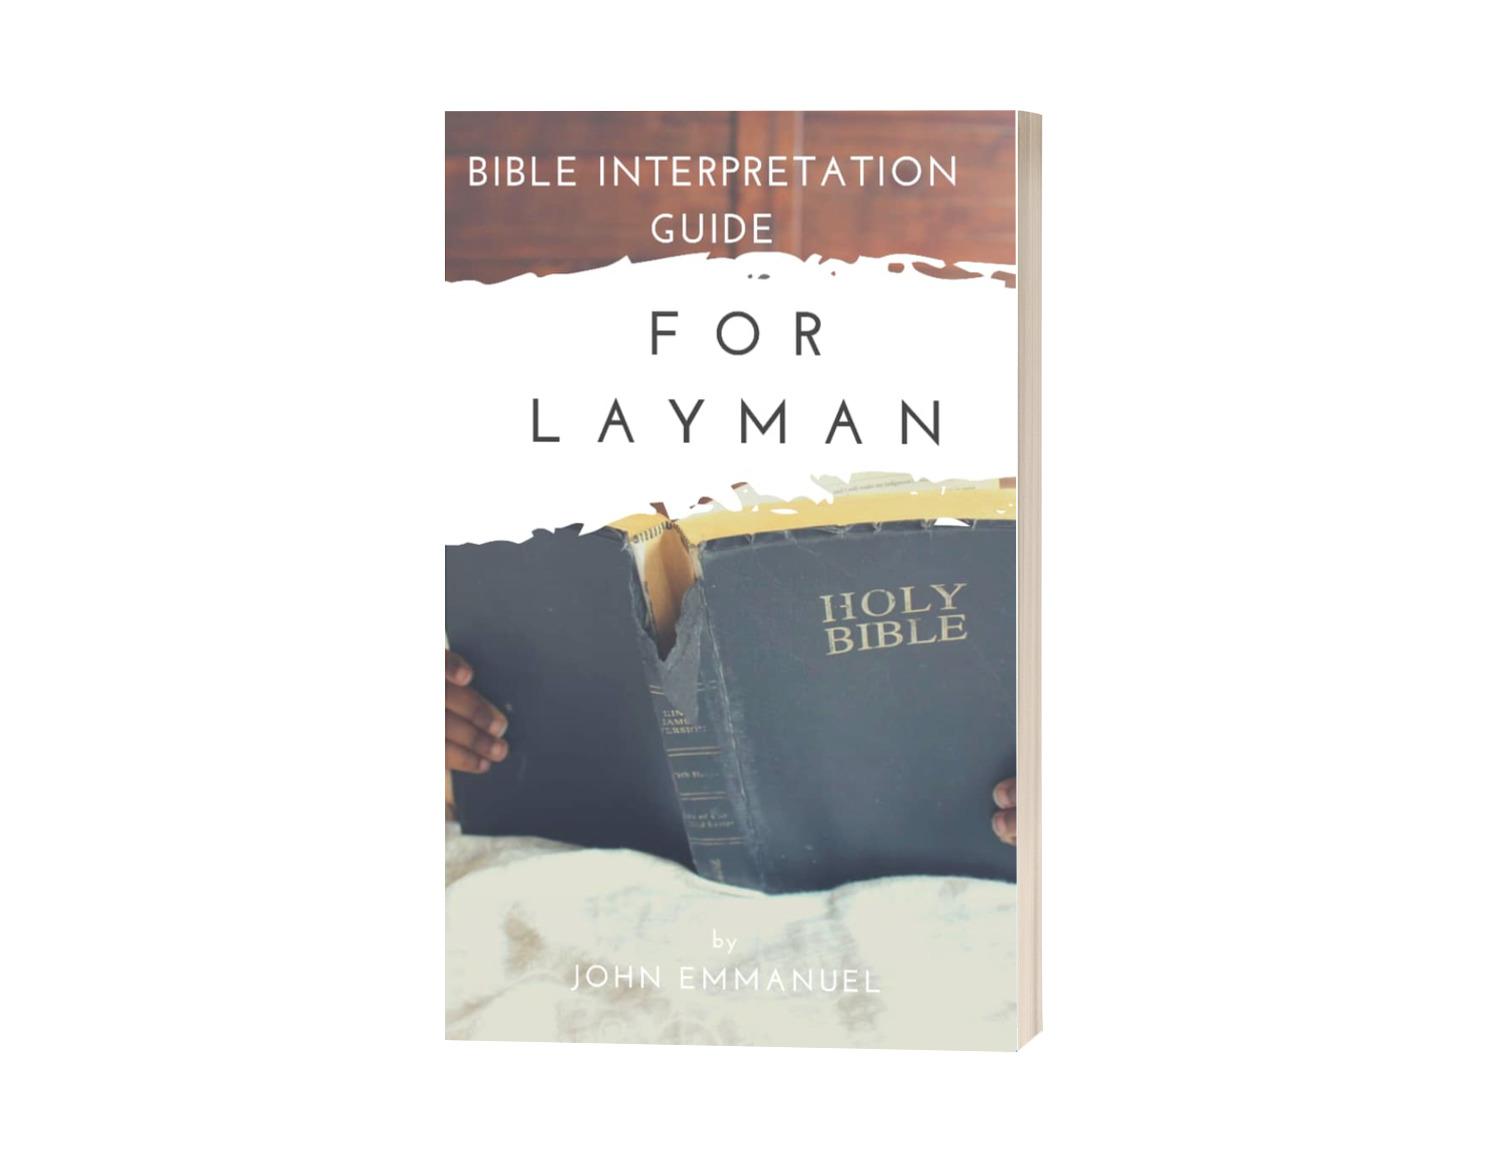 Get your free copy of Bible interpretation guide for layman by JOHN Emmanuel Booksprout